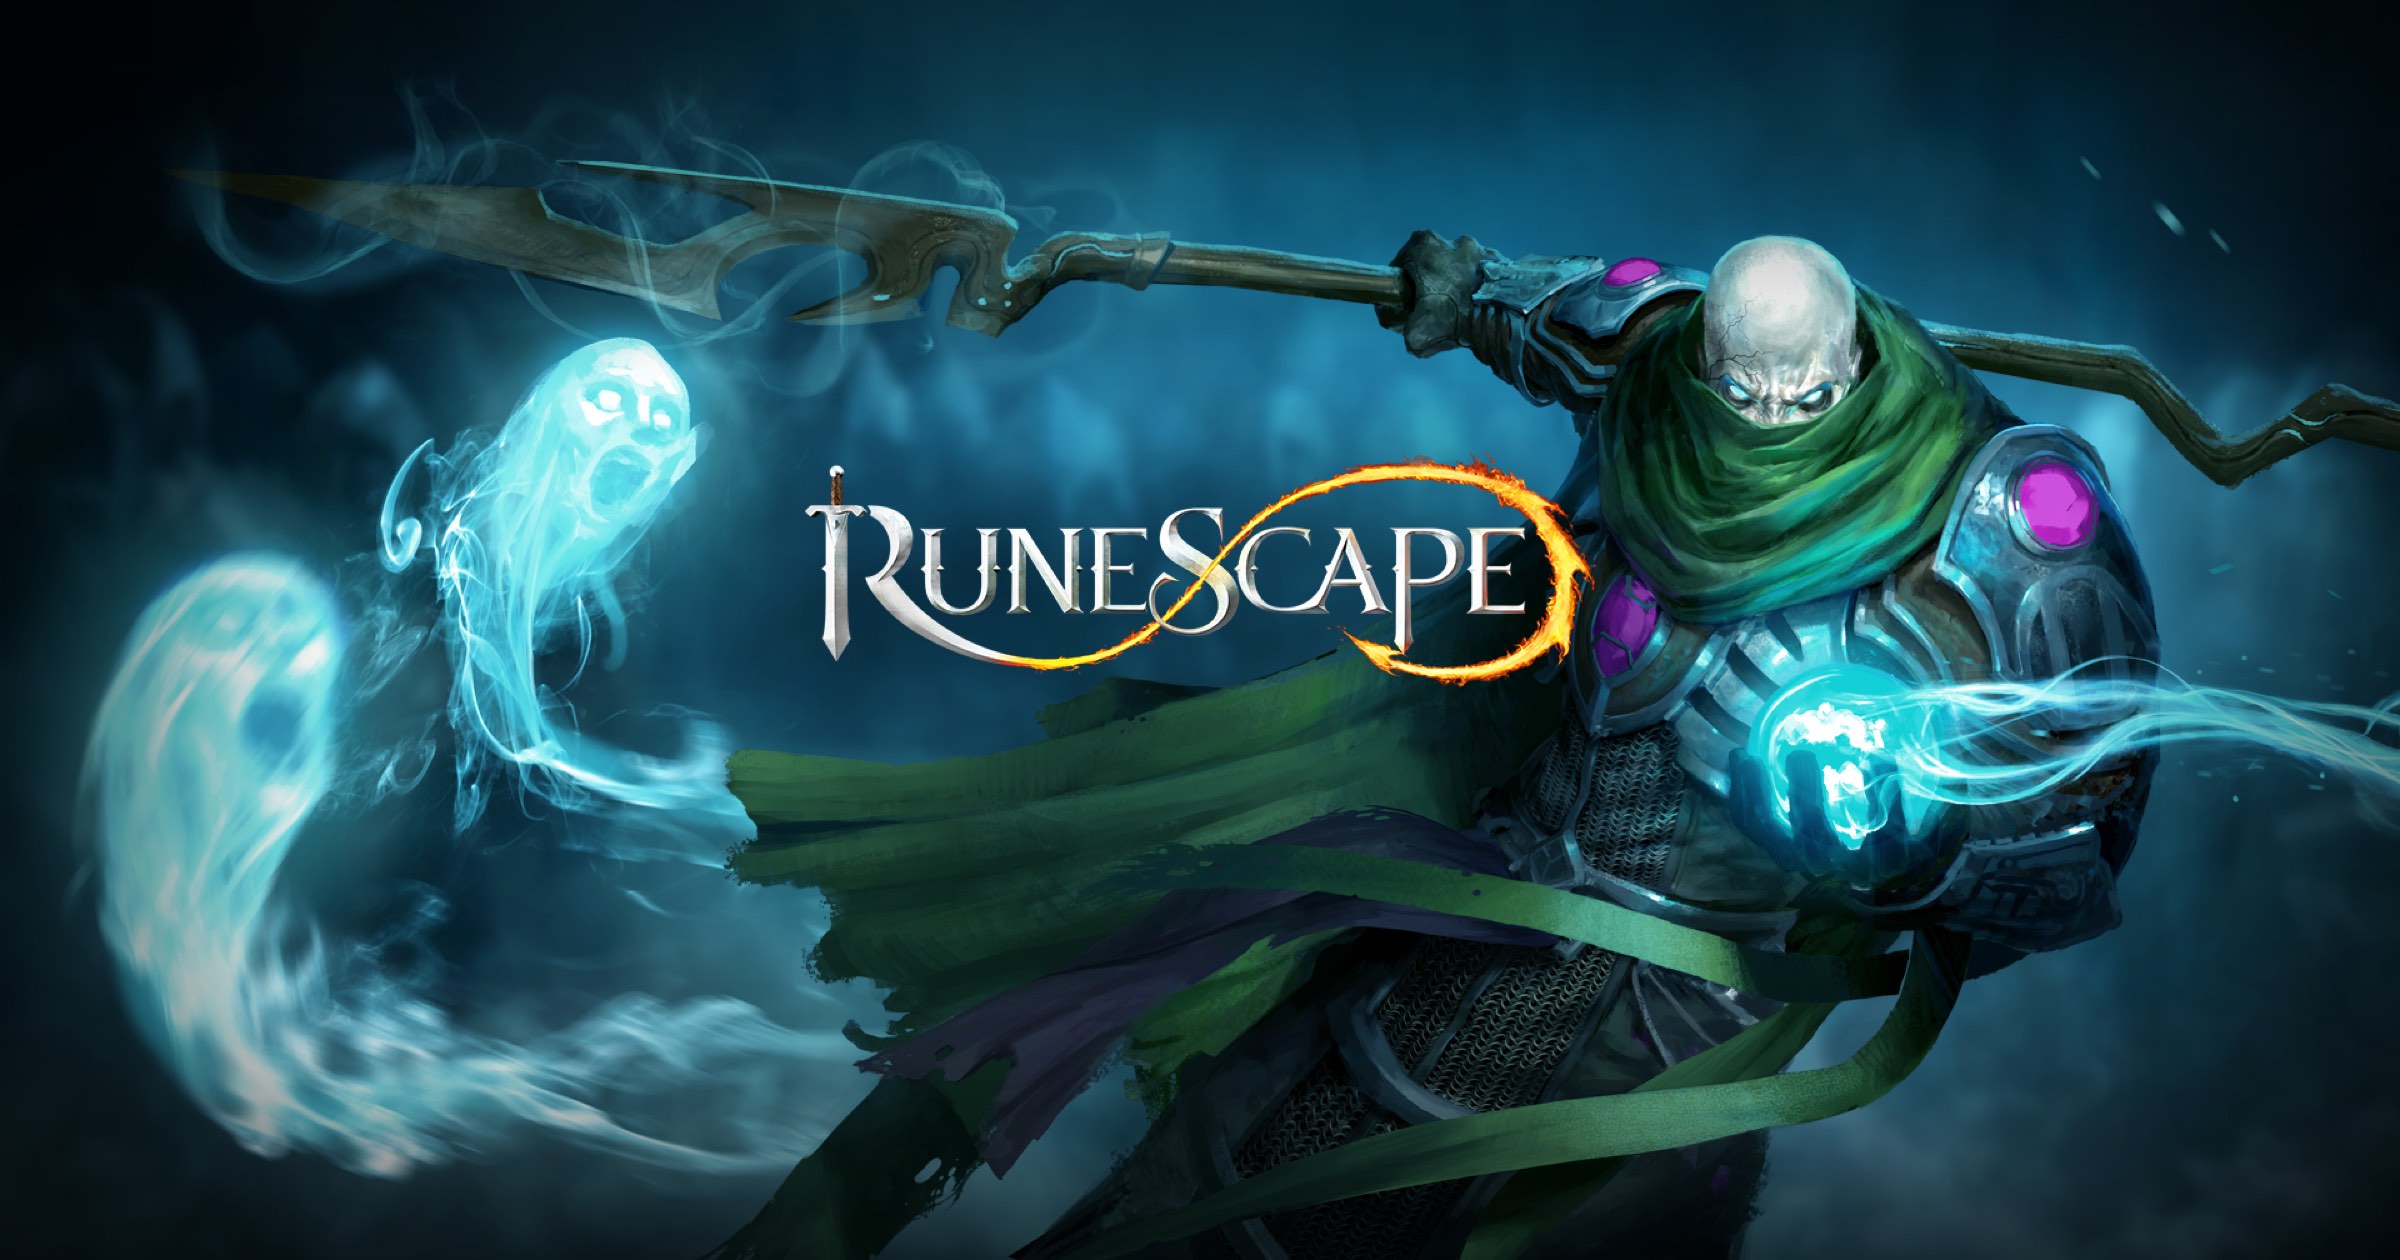 Full RuneScape is Now Available for iPhone and iPad